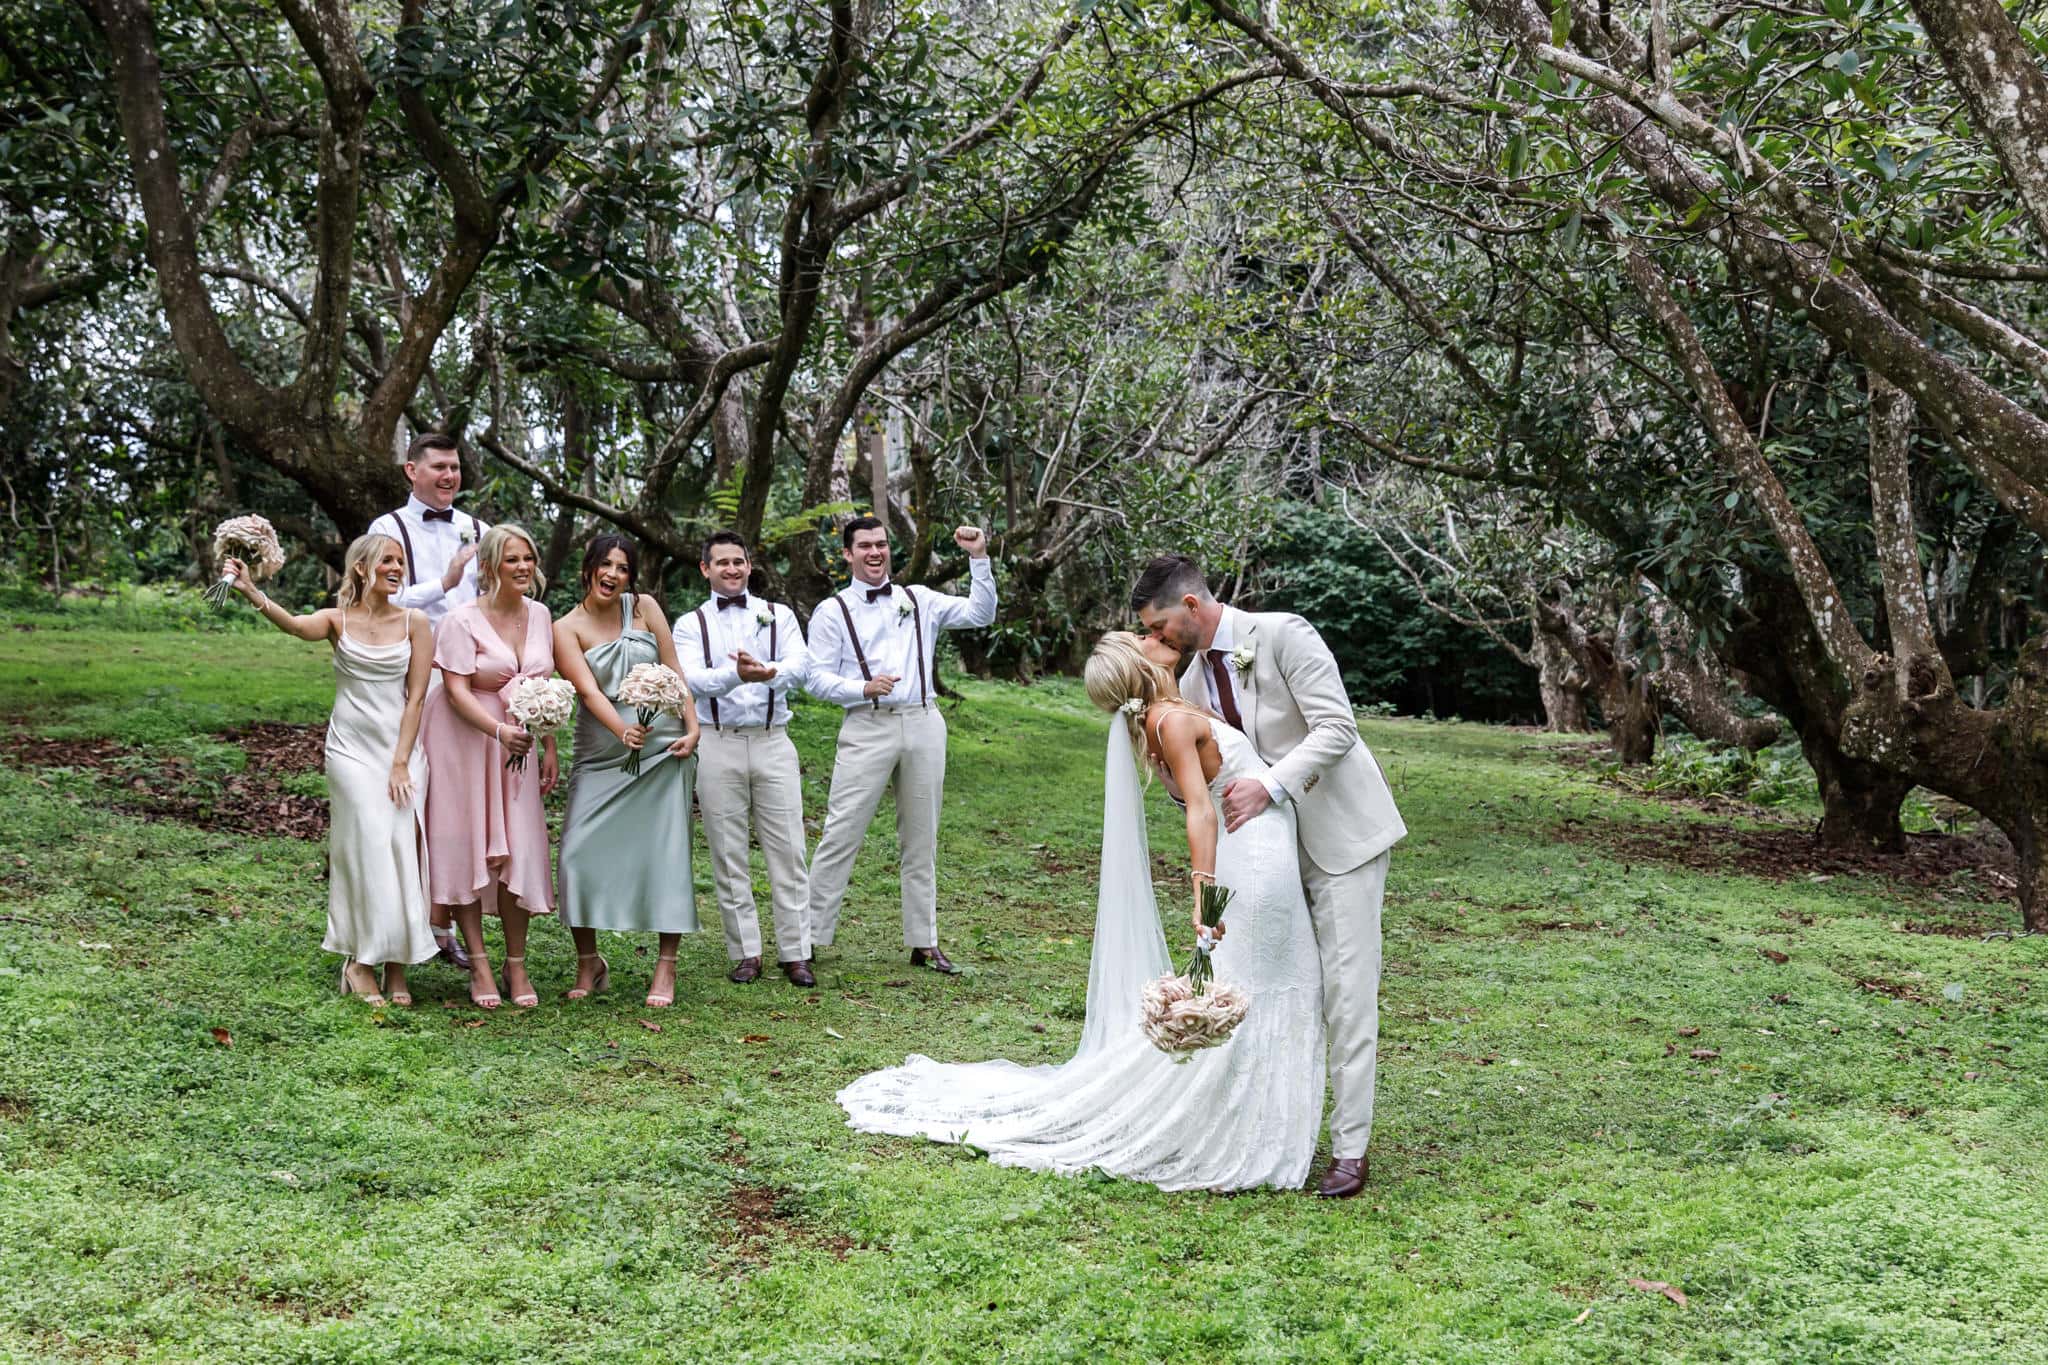 Wedding party photos at Pethers Rainforest Retreat by Mooi Photography.